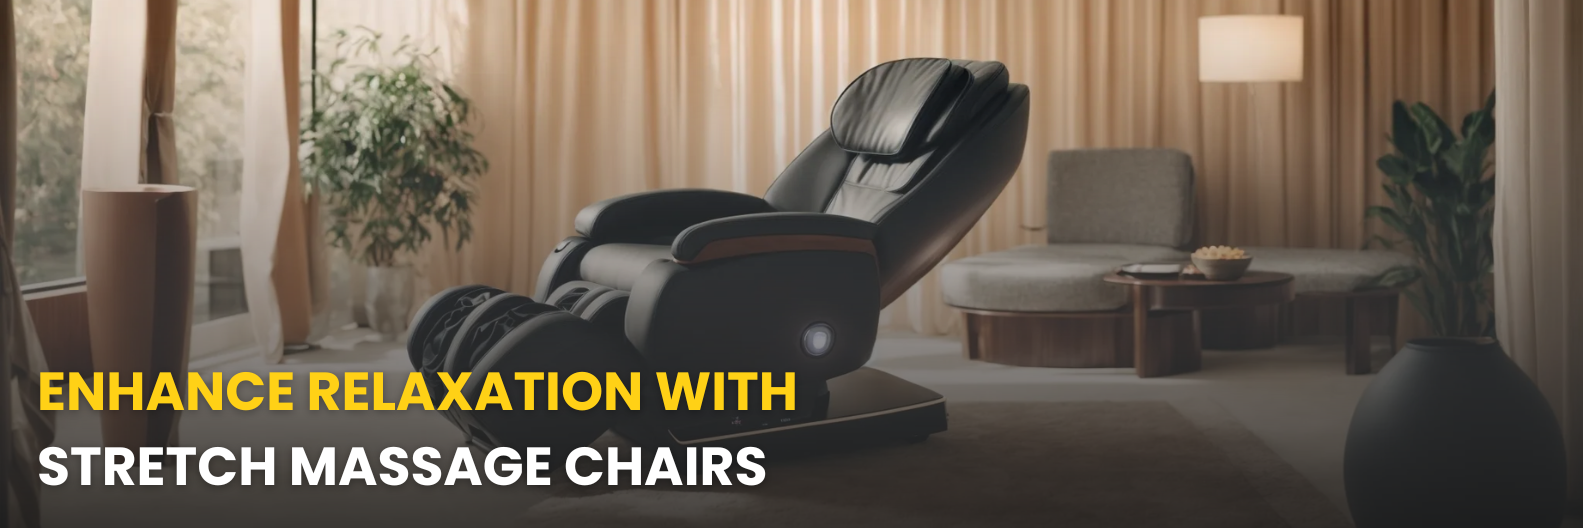 Maximize relaxation with innovative stretching techniques in massage chairs, tailored for ultimate comfort and flexibility.